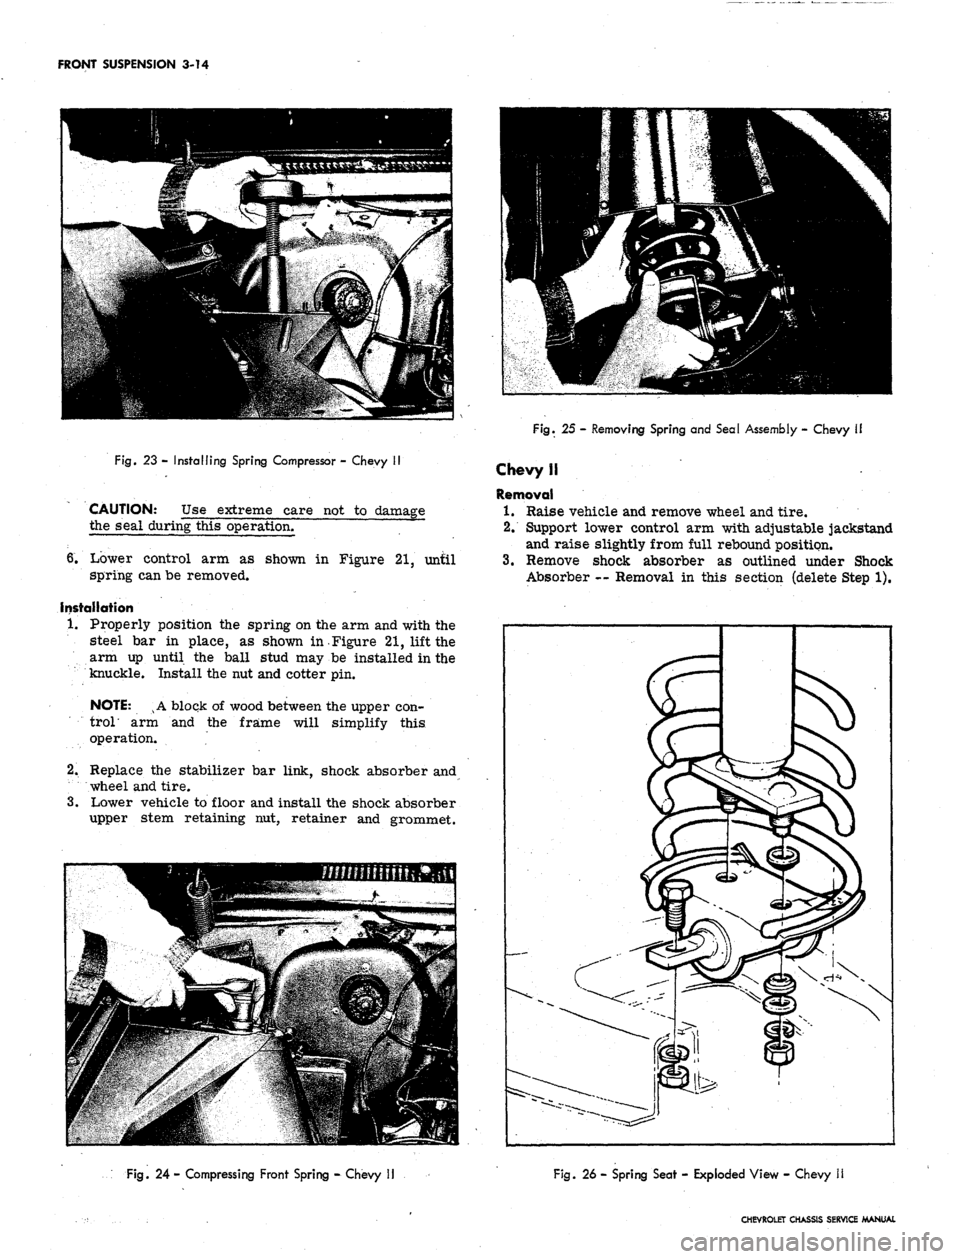 CHEVROLET CAMARO 1967 1.G Chassis Owners Manual 
FRONT SUSPENSION 3-14

Fig.
 23 - Installing Spring Compressor - Chevy II

CAUTION: Use extreme care not to damage

the seal during this operation.

6. Lower control arm as shown in Figure 21, until
